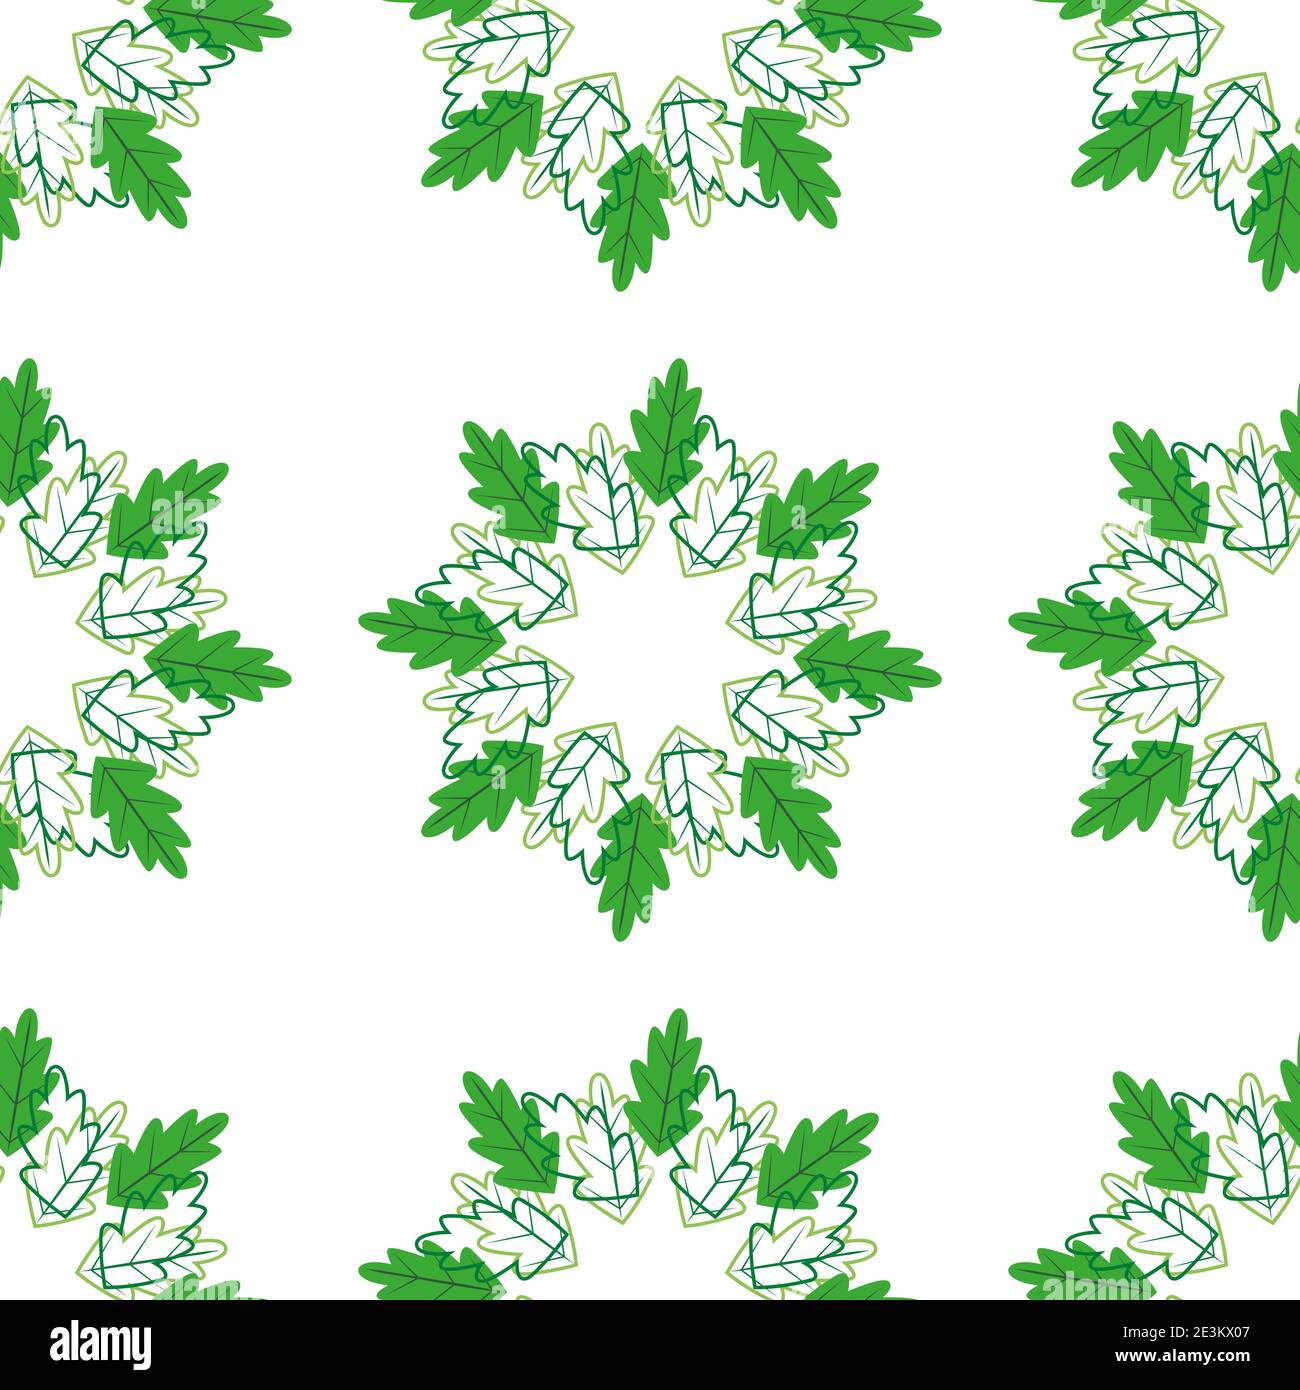 Wreaths of leaves and their contours on a white background. Abstract seamless vector pattern with green oak leaves. Deciduous decor. Stock Vector